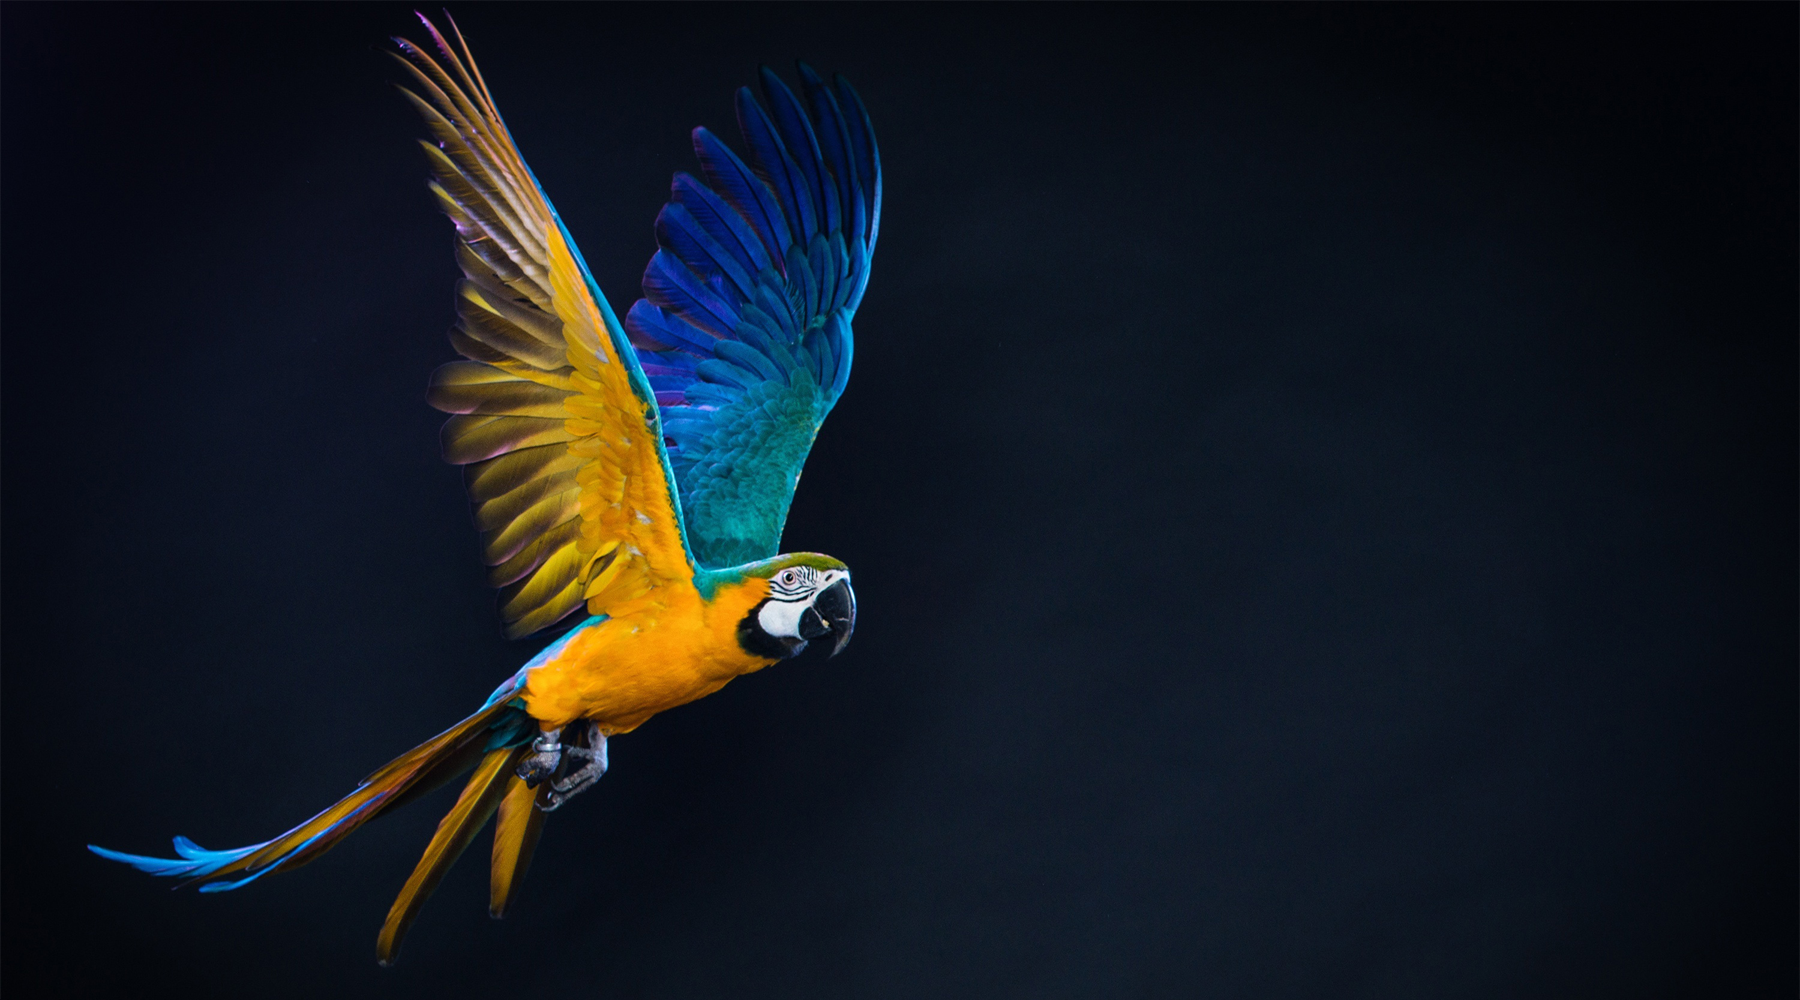 Wingedvictory Flying Macaw